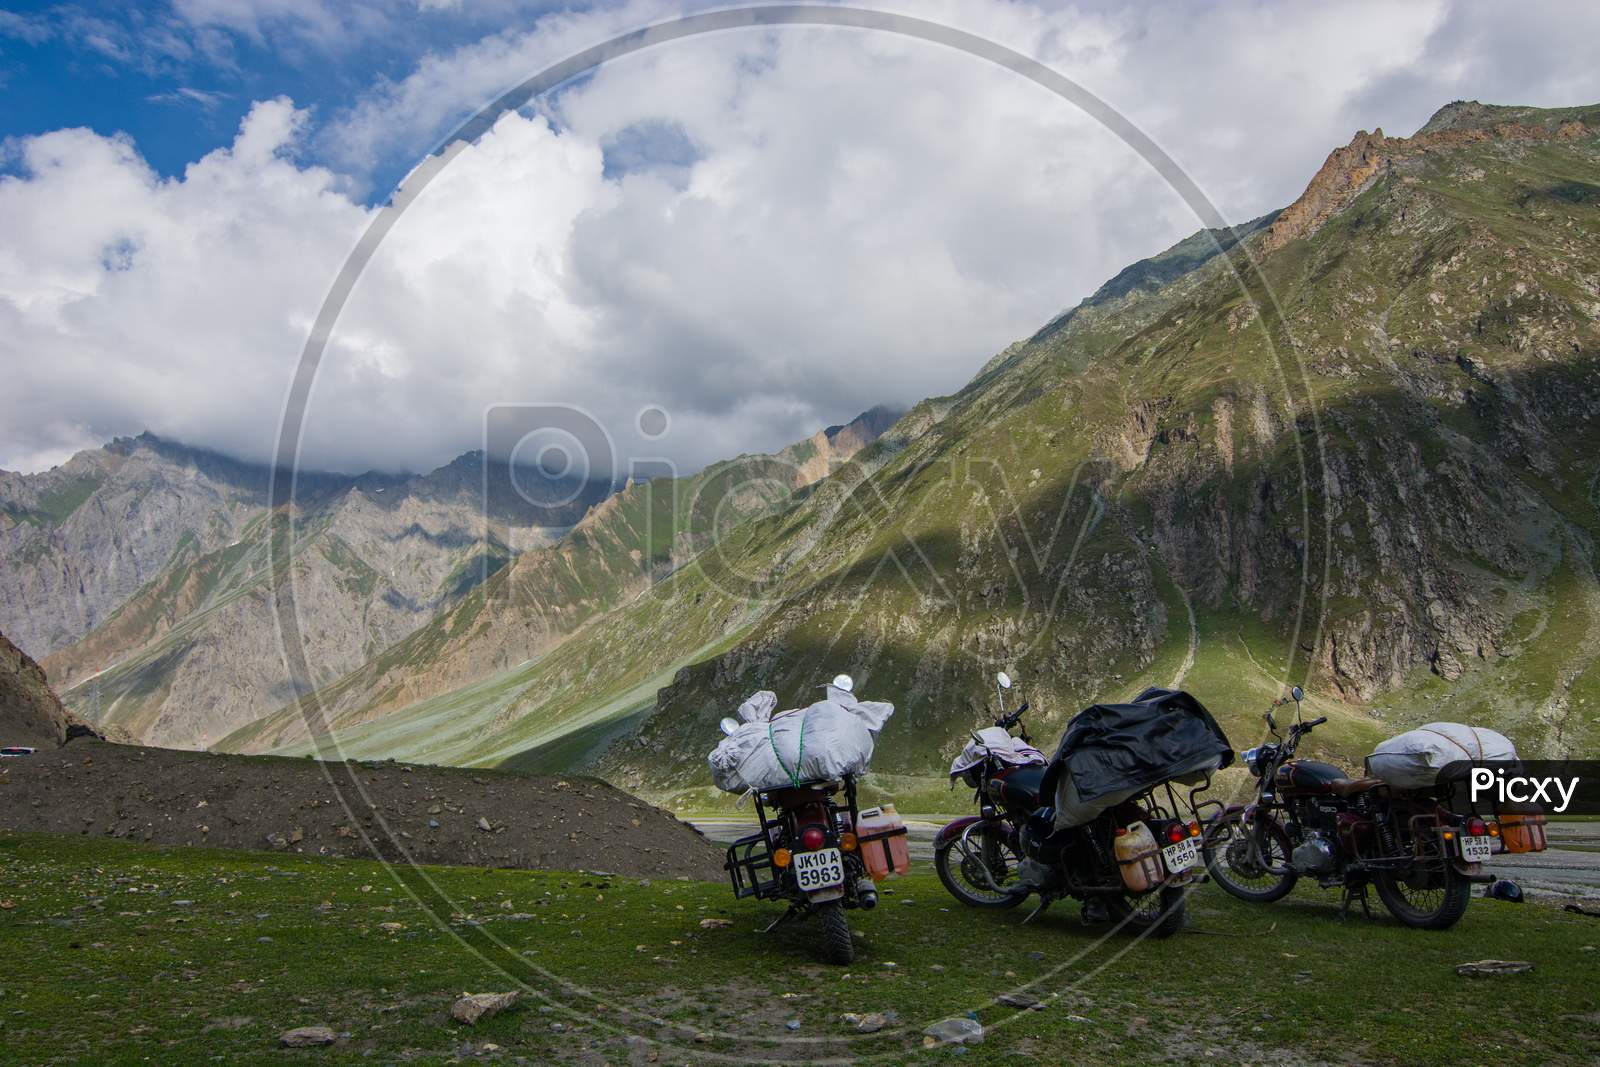 Royal Enfield bikes packed with luggage- Leh Ladakh